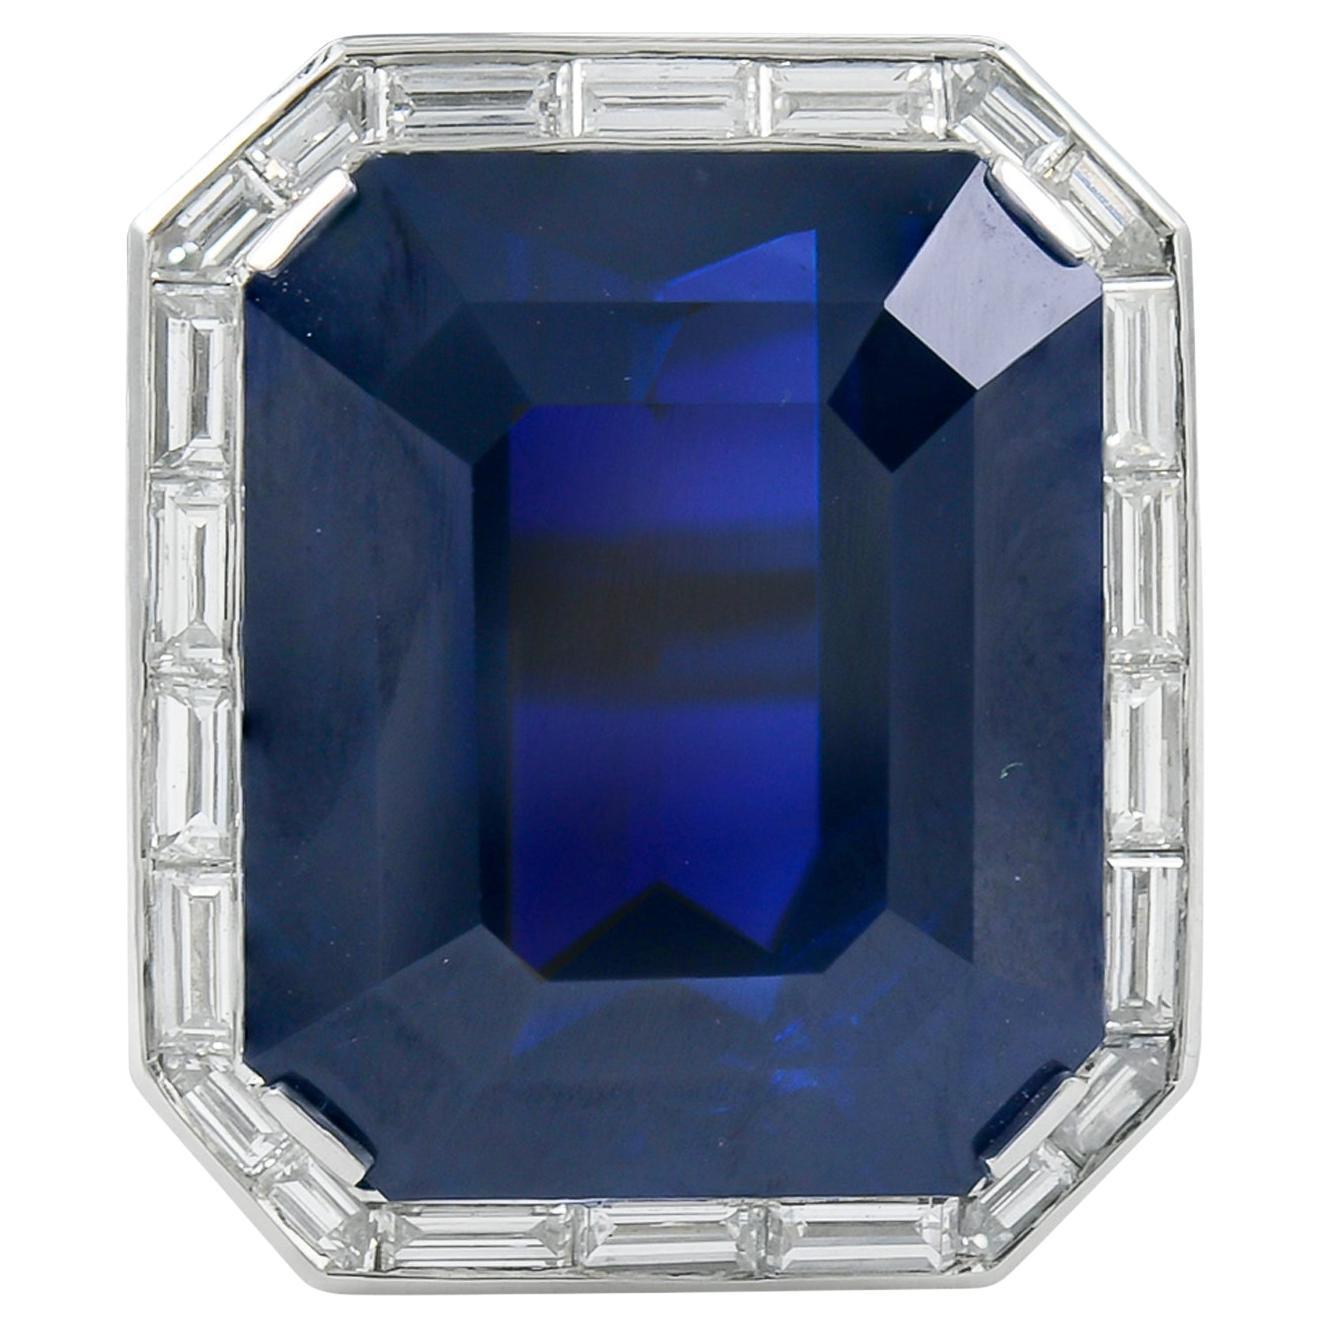 Spectra Fine Jewelry, Certified 37.13 Carat Sapphire Diamond Cocktail Ring For Sale